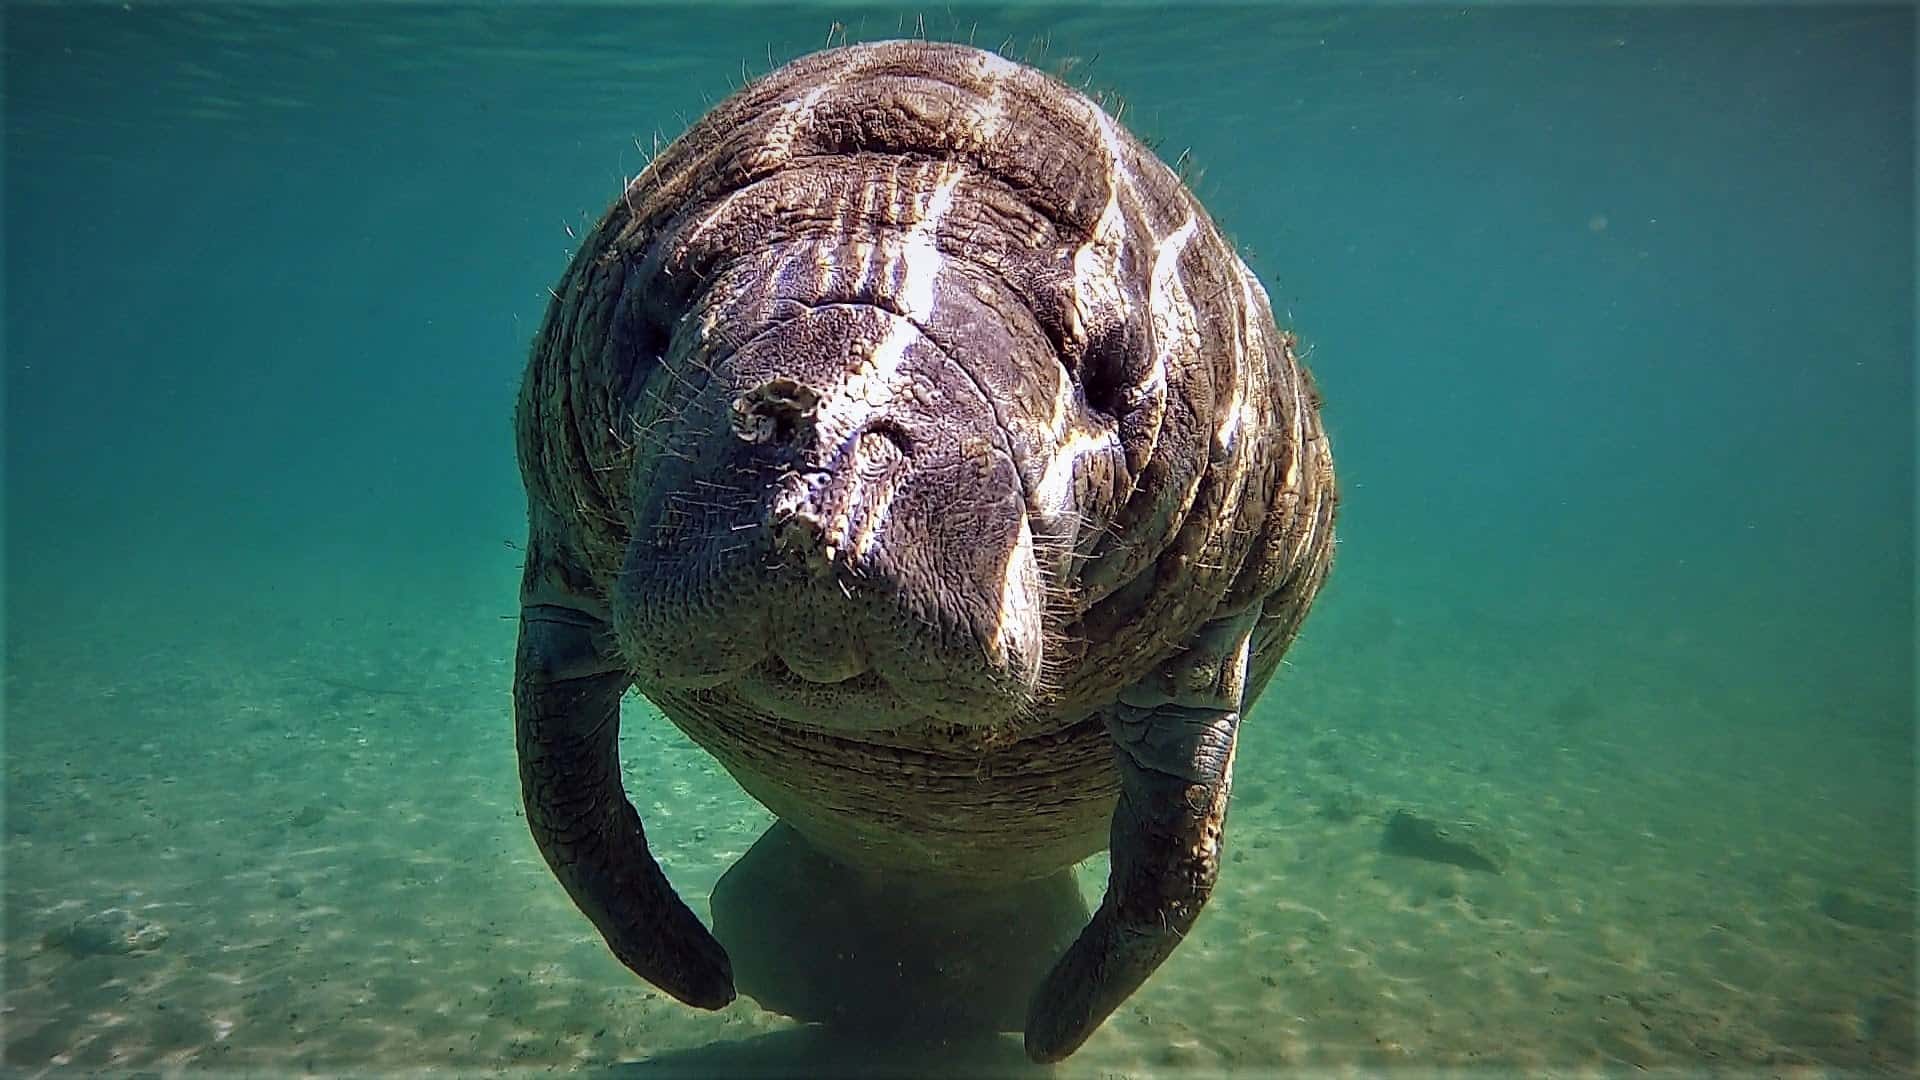 The Only Place in the USA Where you can Legally Swim with Manatees